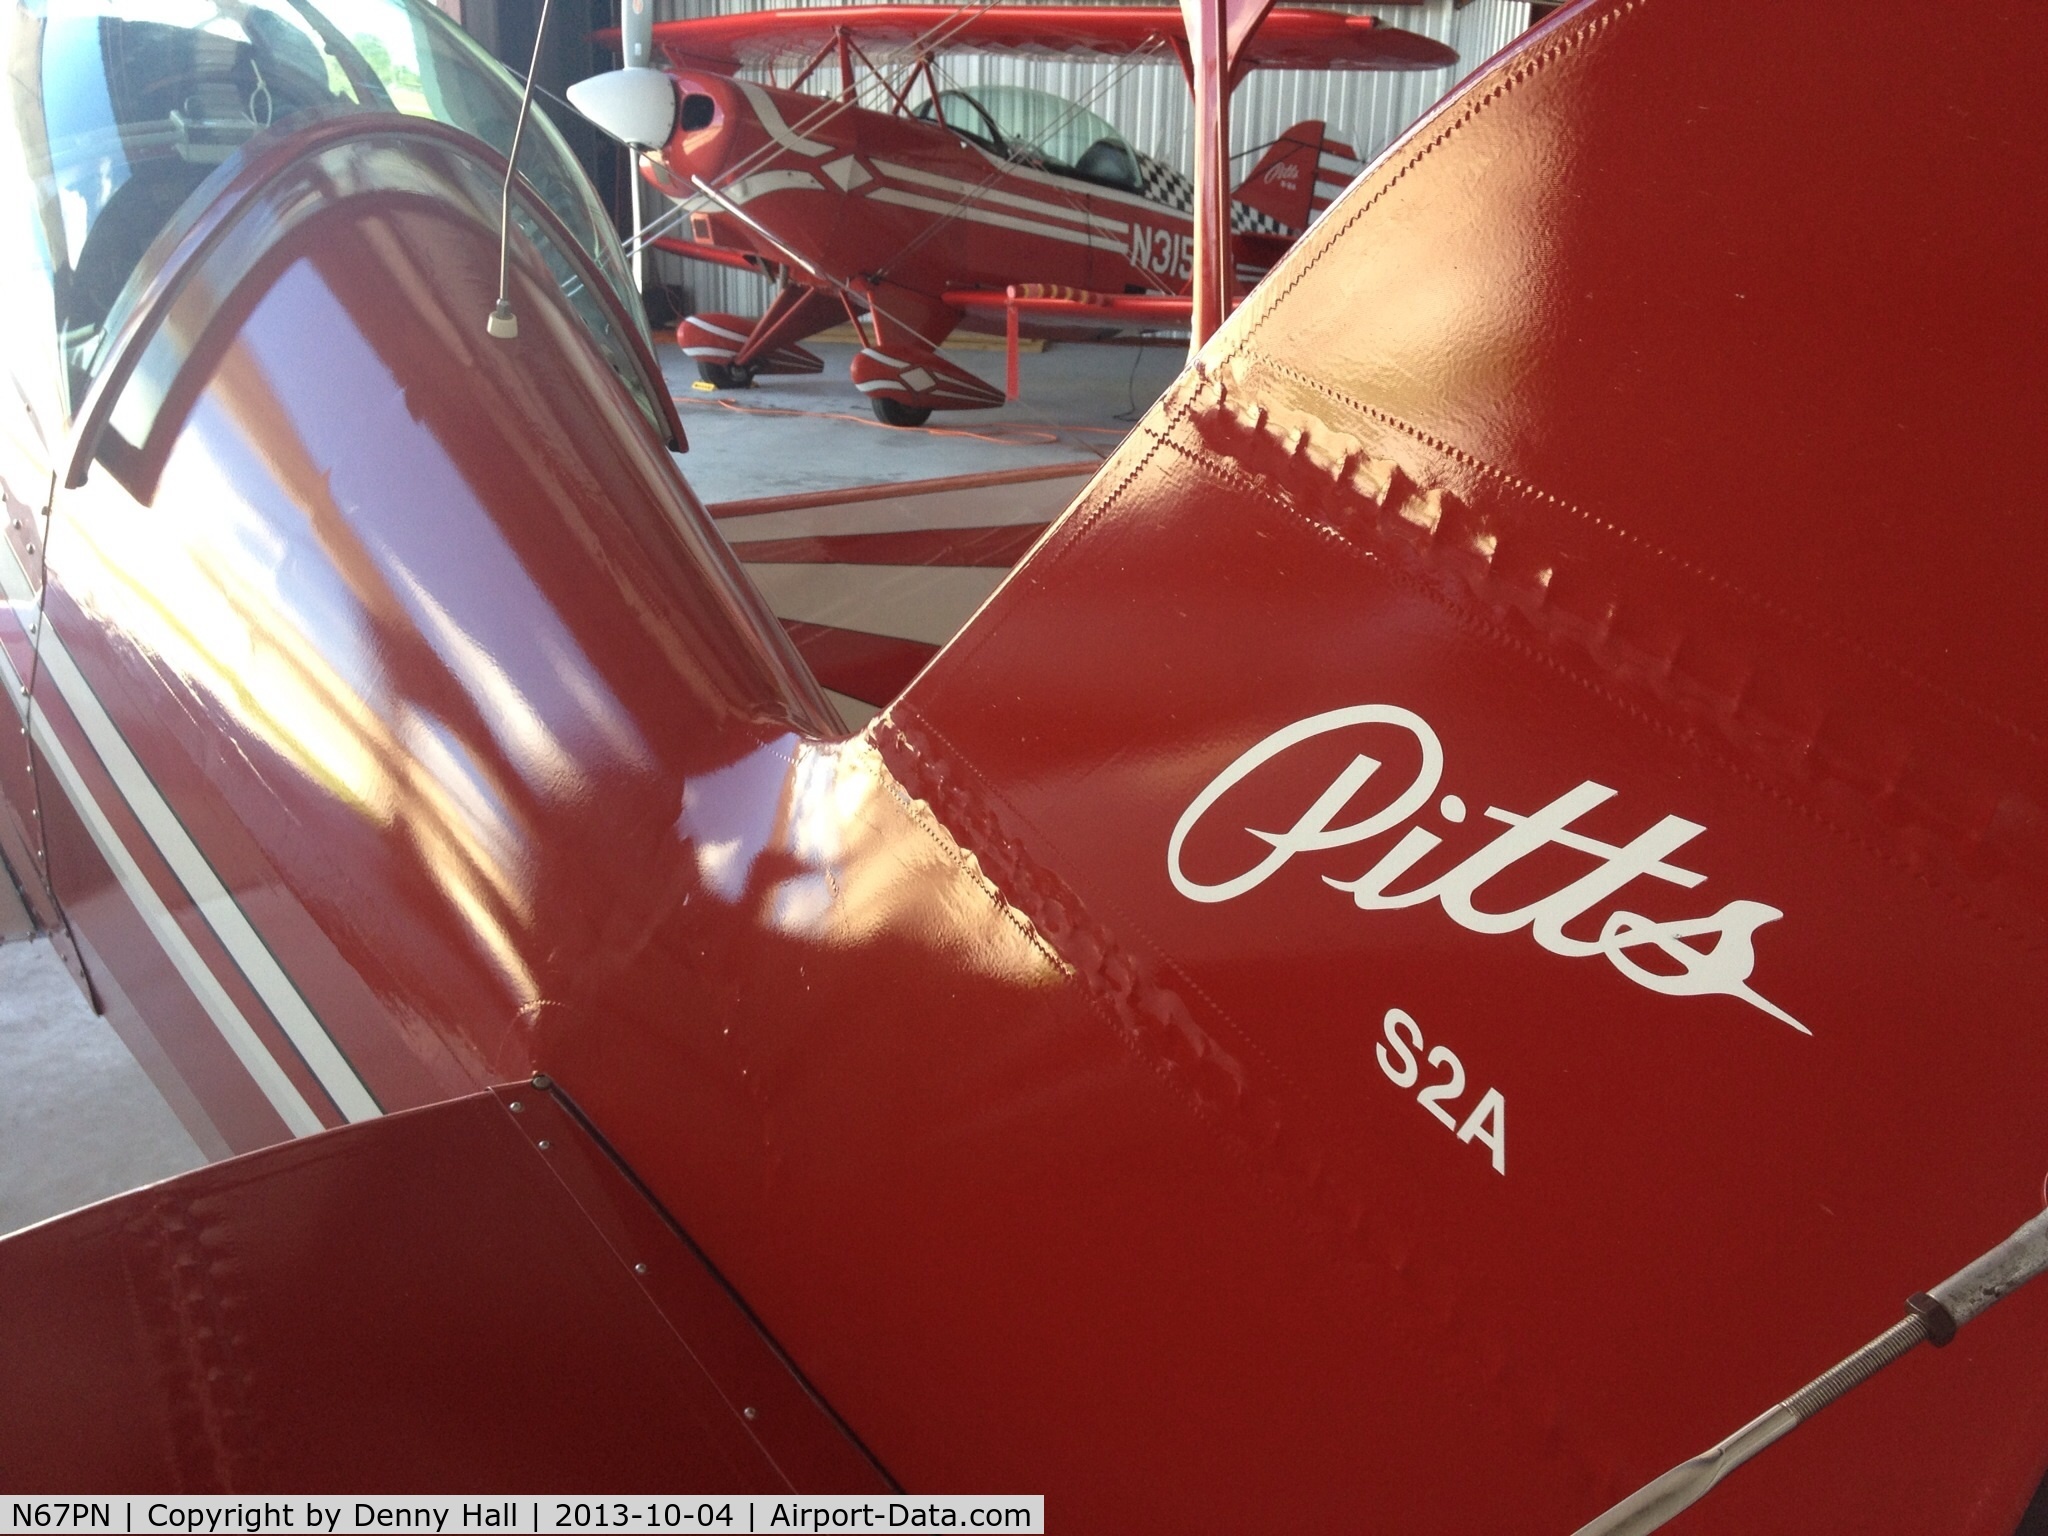 N67PN, 1981 Aerotek Pitts S-2A Special C/N 2219, Photo taken N. Perry airport, FL.
Current owner Dennis Hall, Pitts, LLC